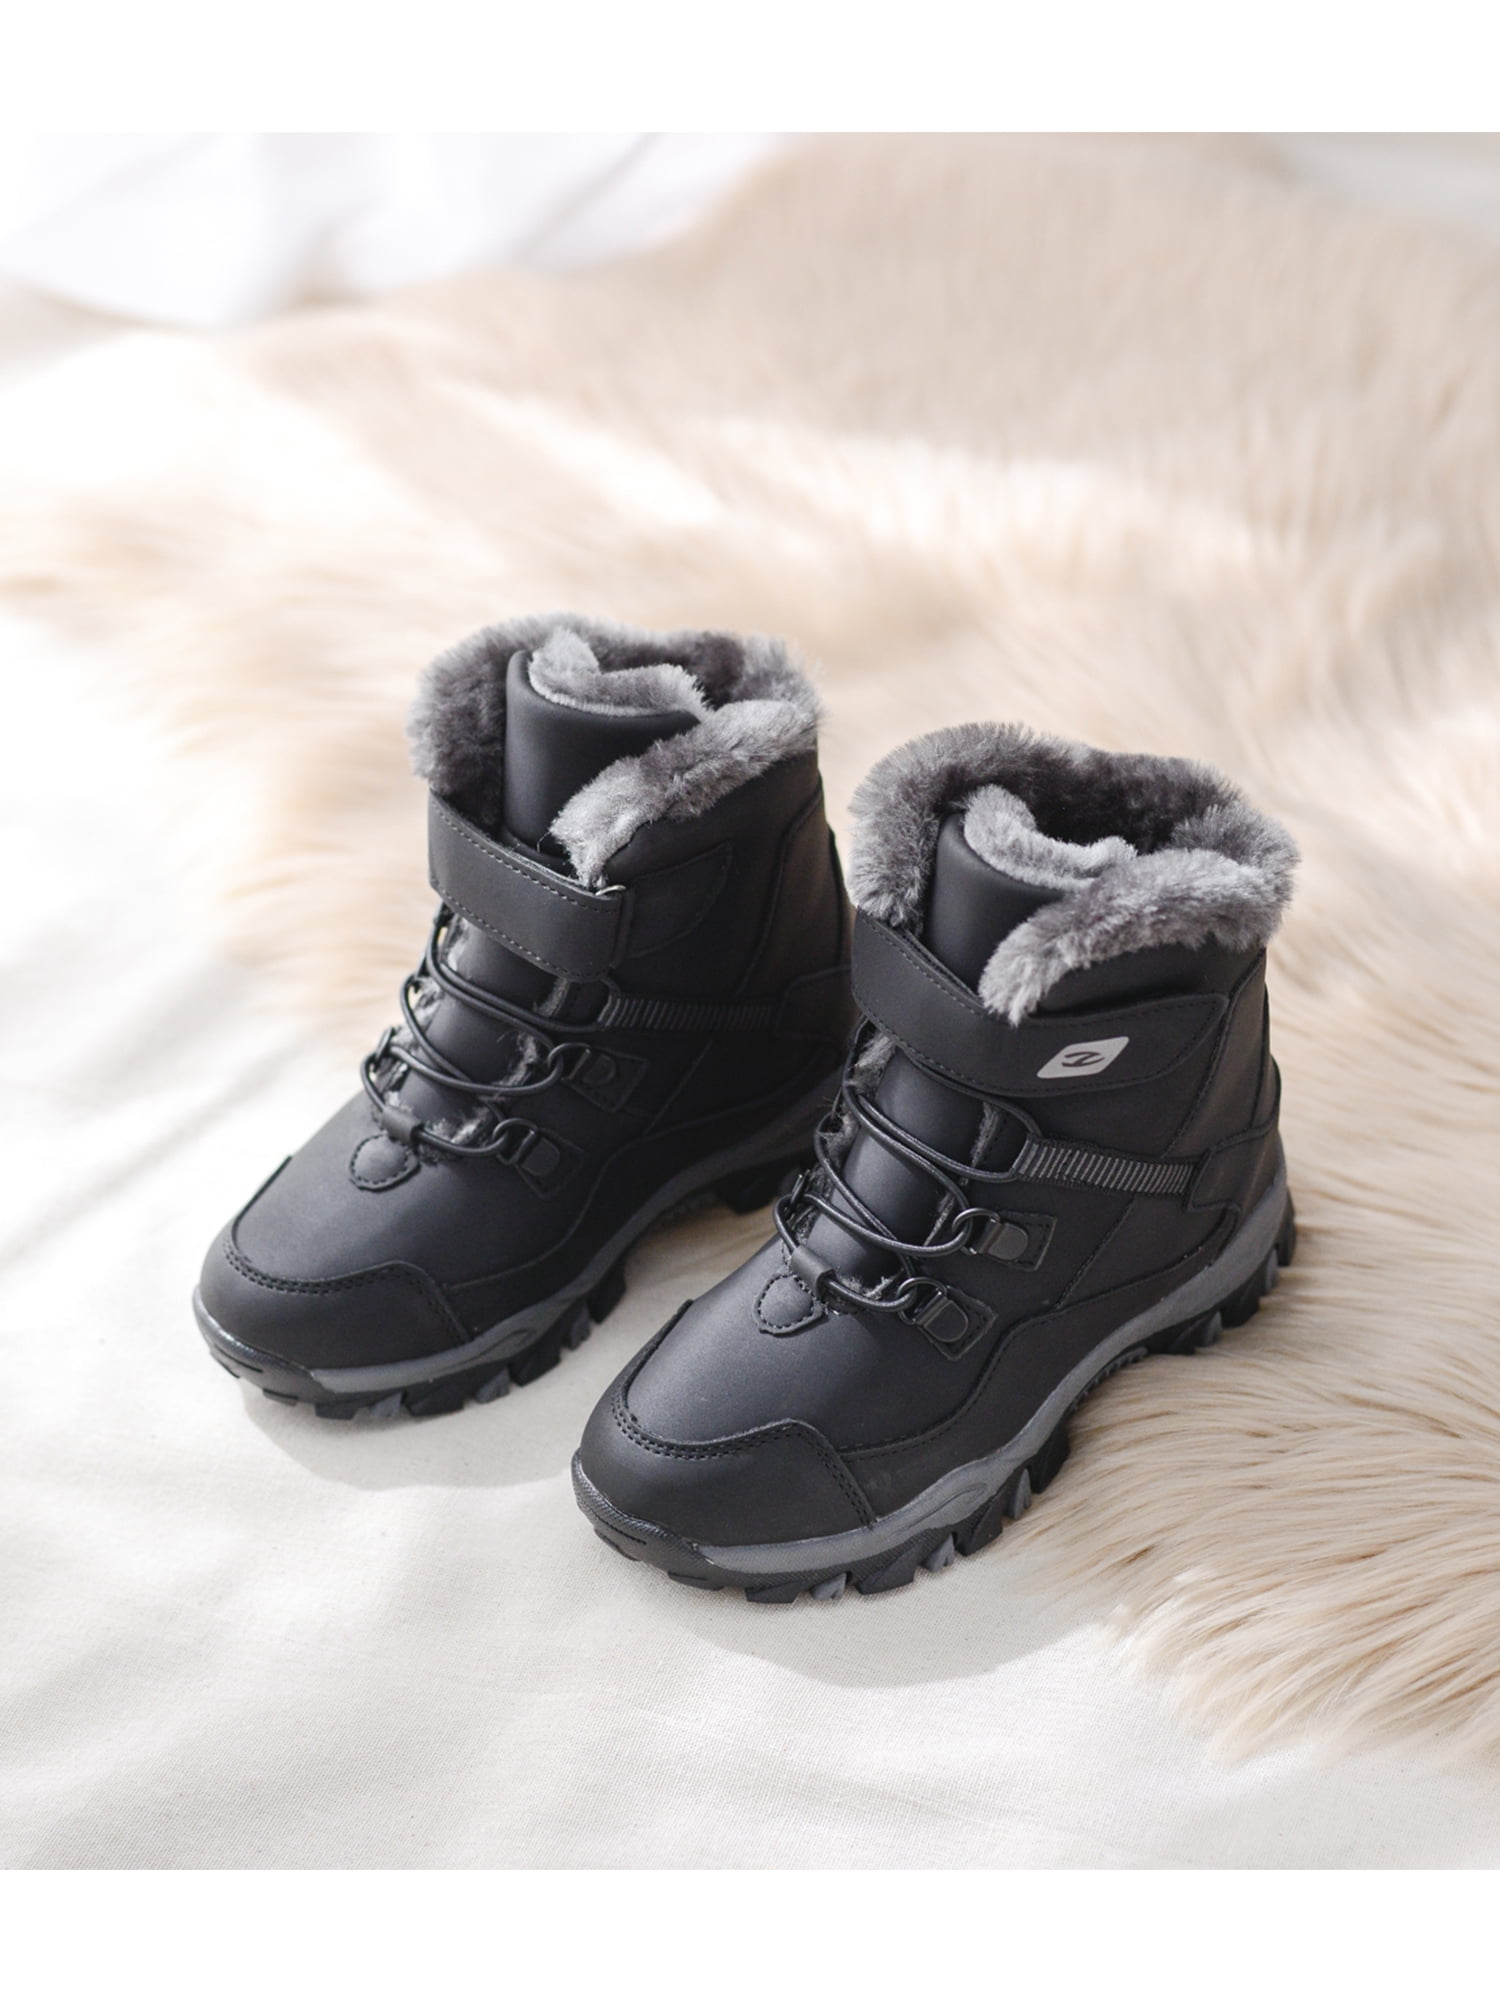 warm shoes for boys